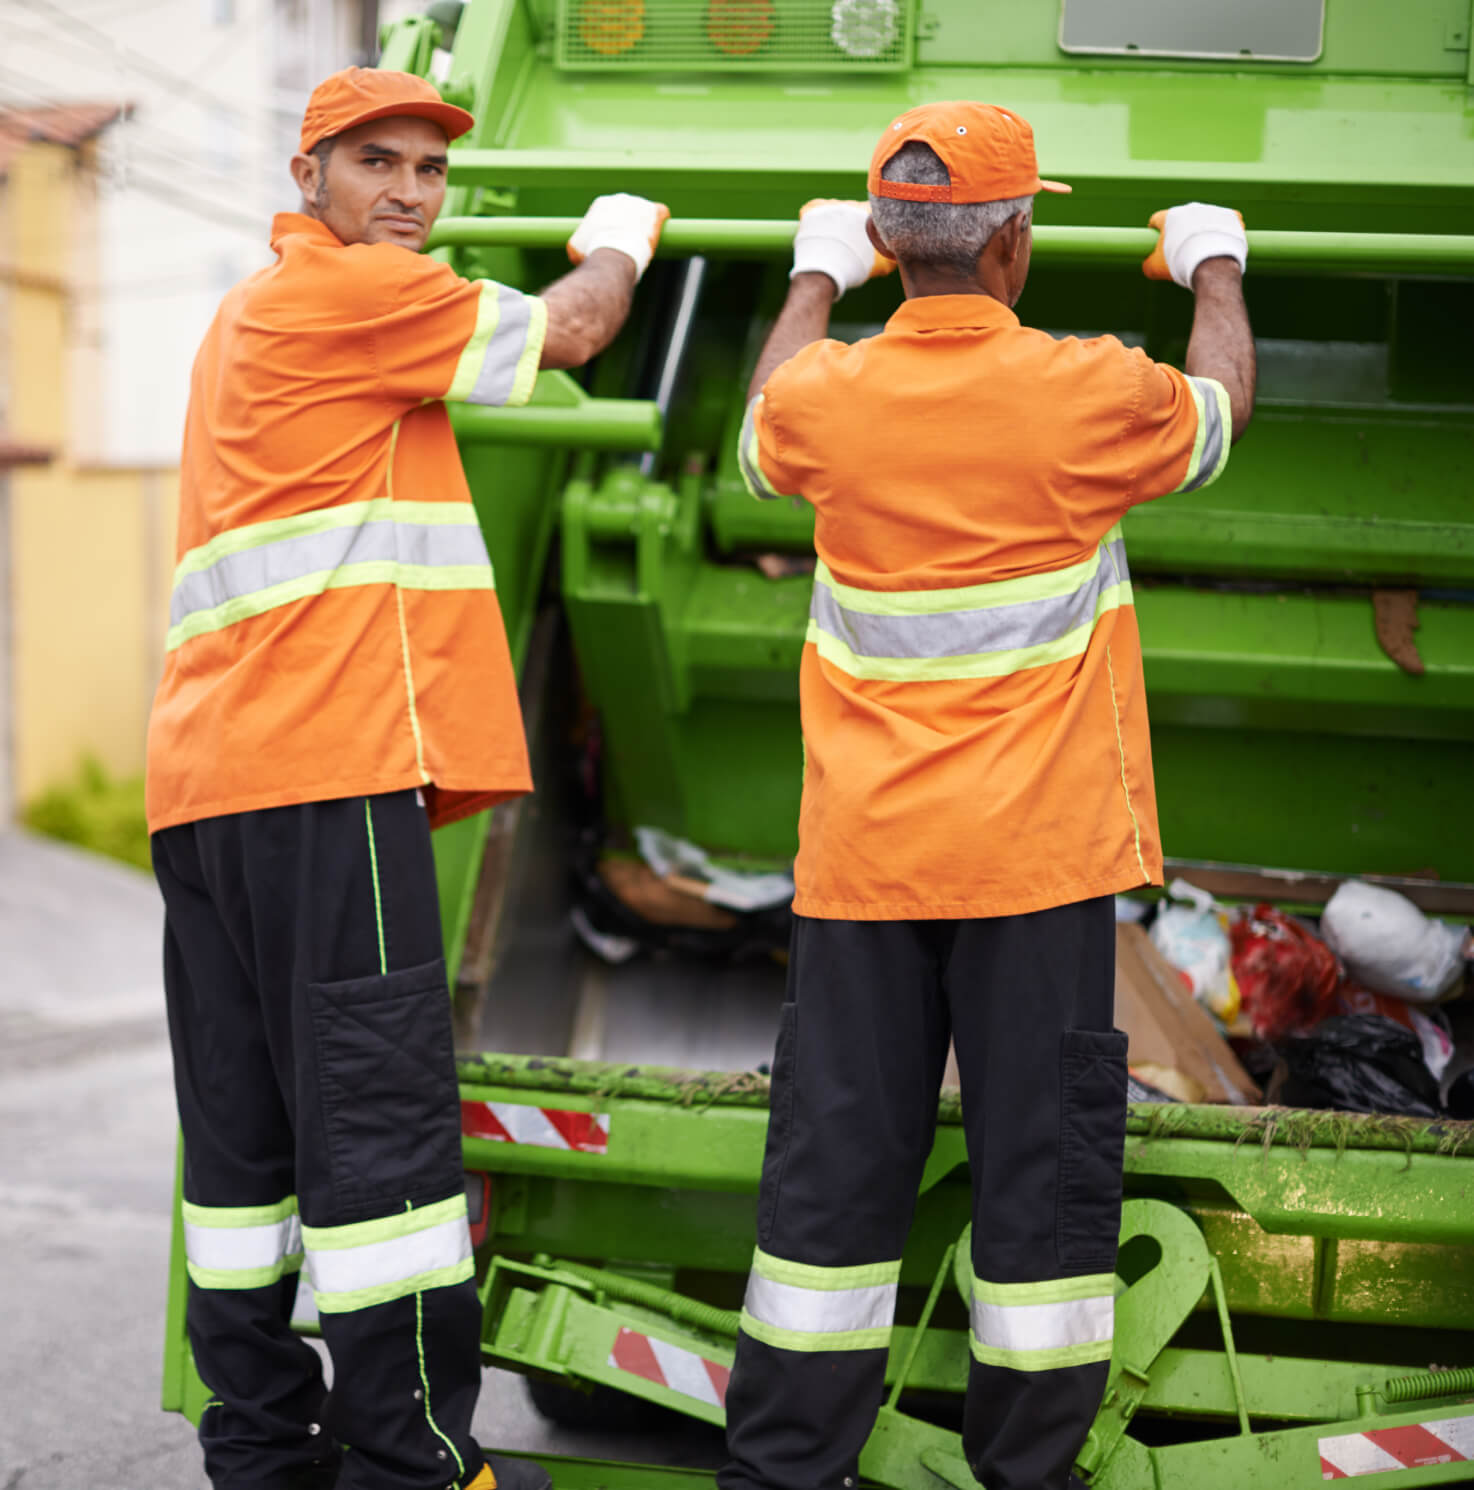 Garbage collection insurance